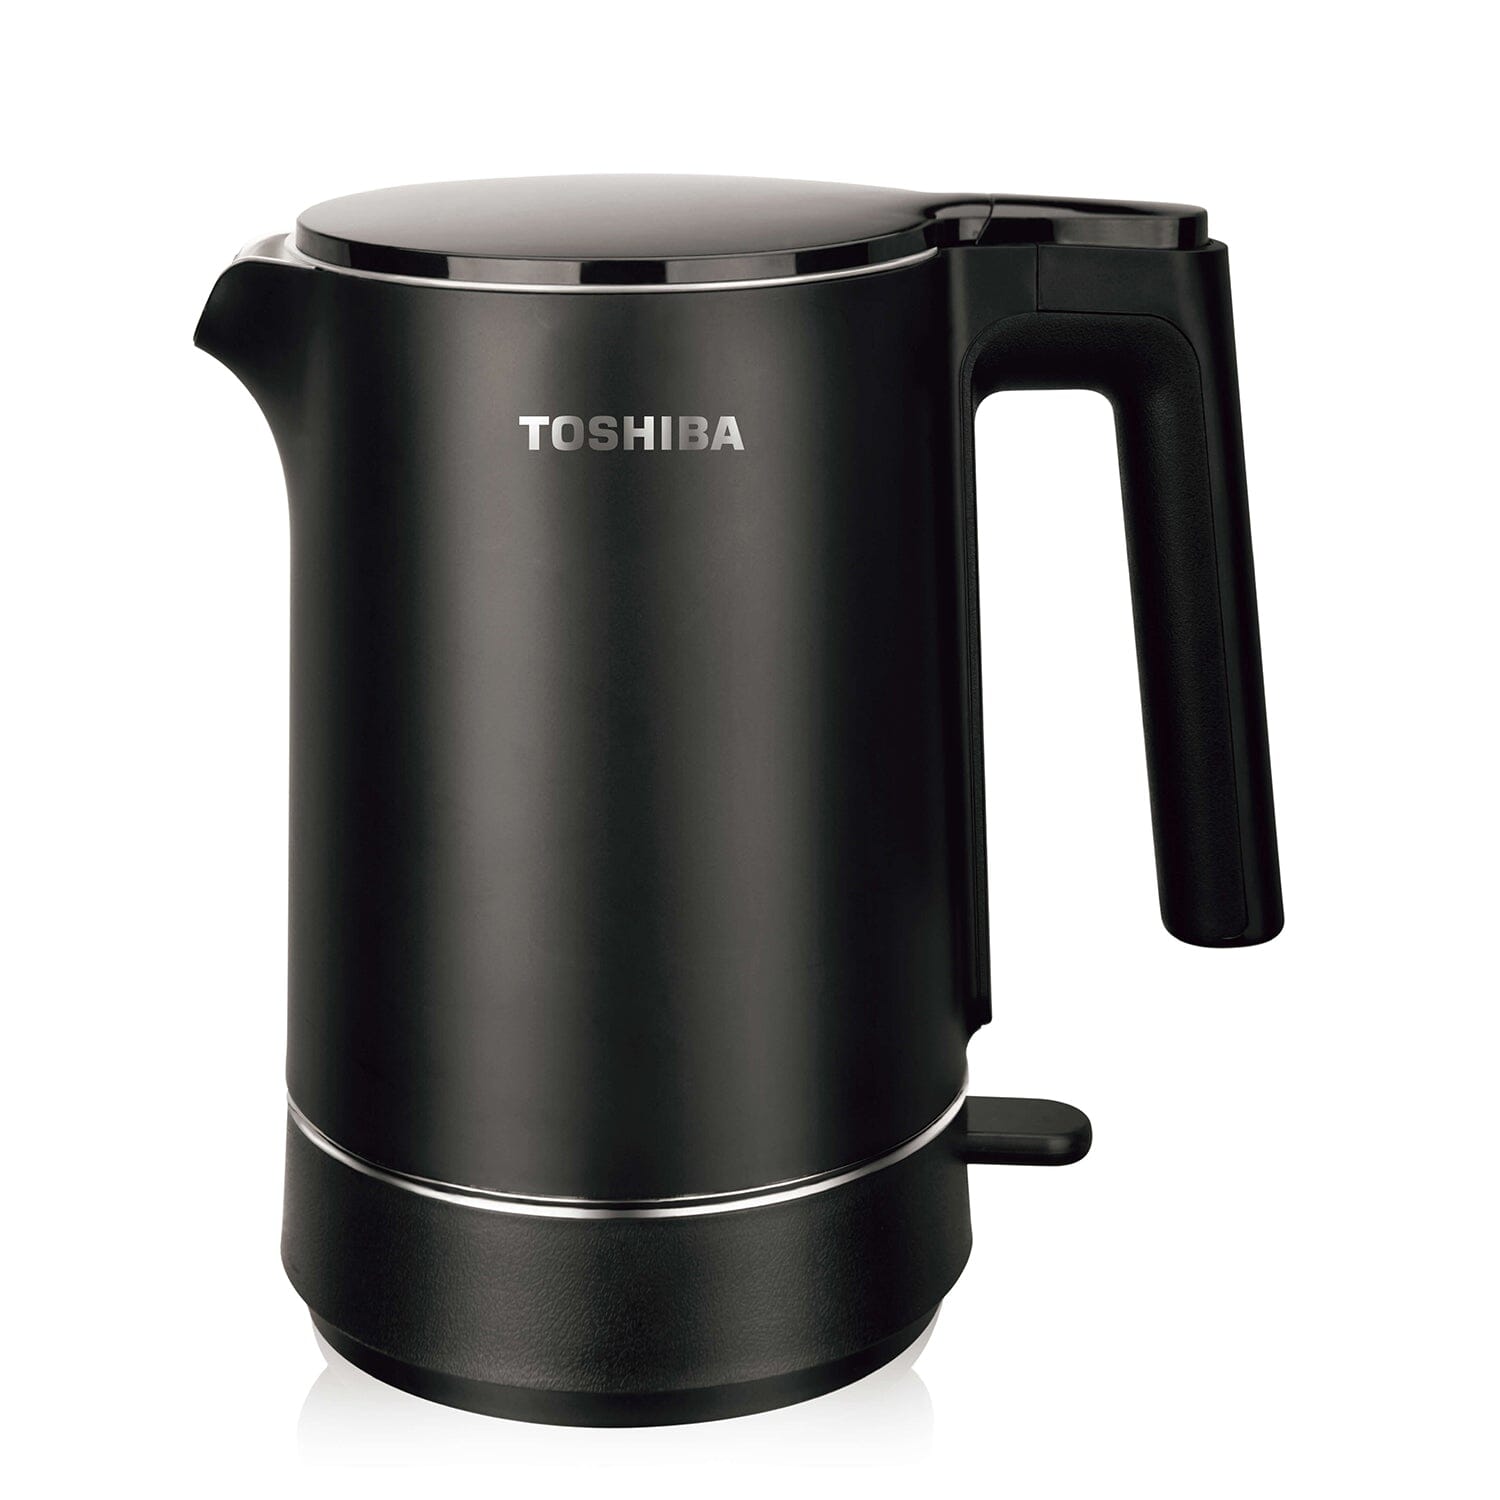 Toshiba 1.5L/1.7L Stainless Steel Double Wall Protection Fast Boilling Electric Jug Kettle Toshiba 1.5L Black 